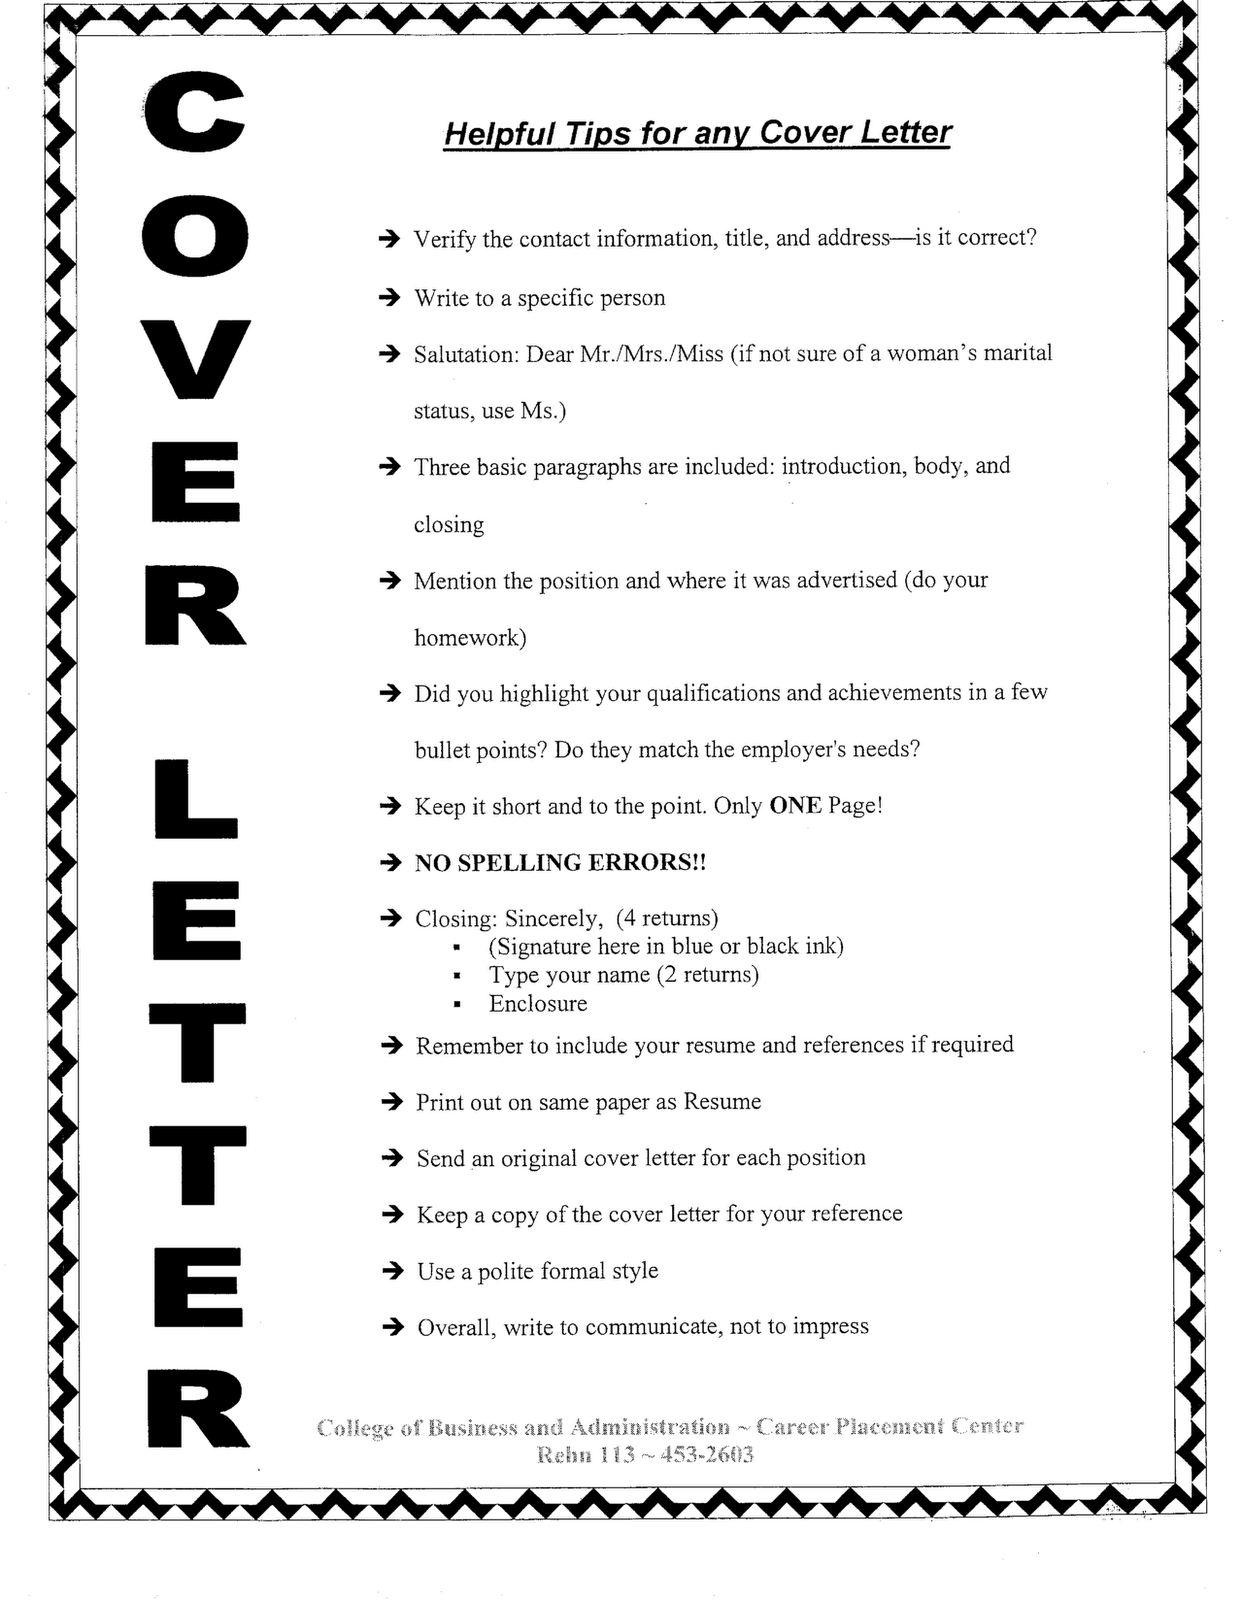 cover resume letter answers yahoo